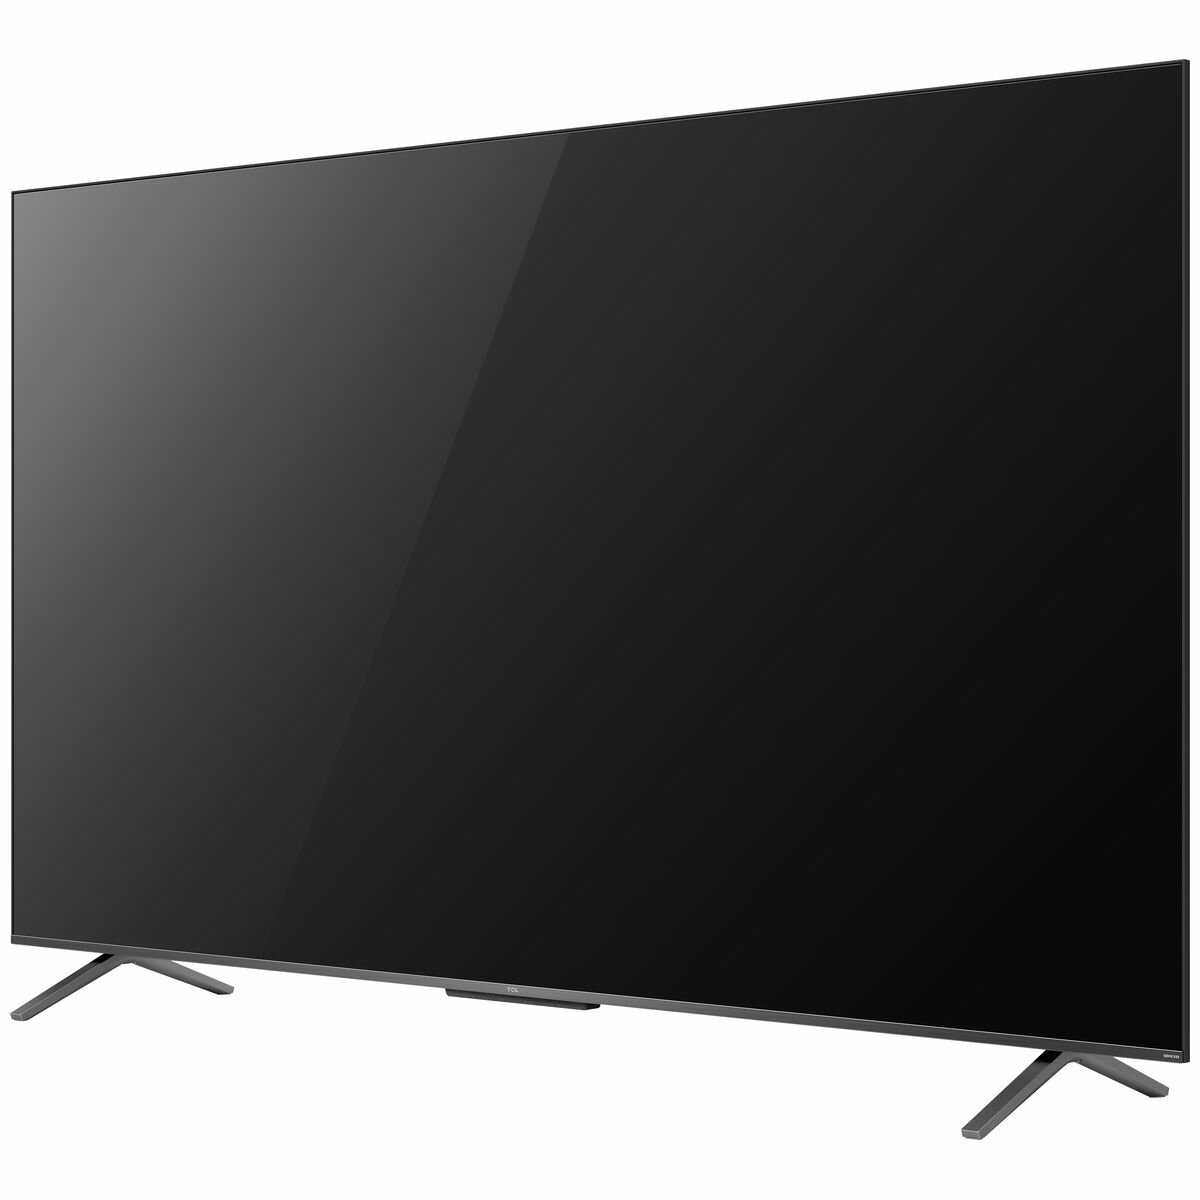 tcl-65-inch-p725-4k-uhd-hdr-smart-android-tv-65p725-3-9f51bc41-high